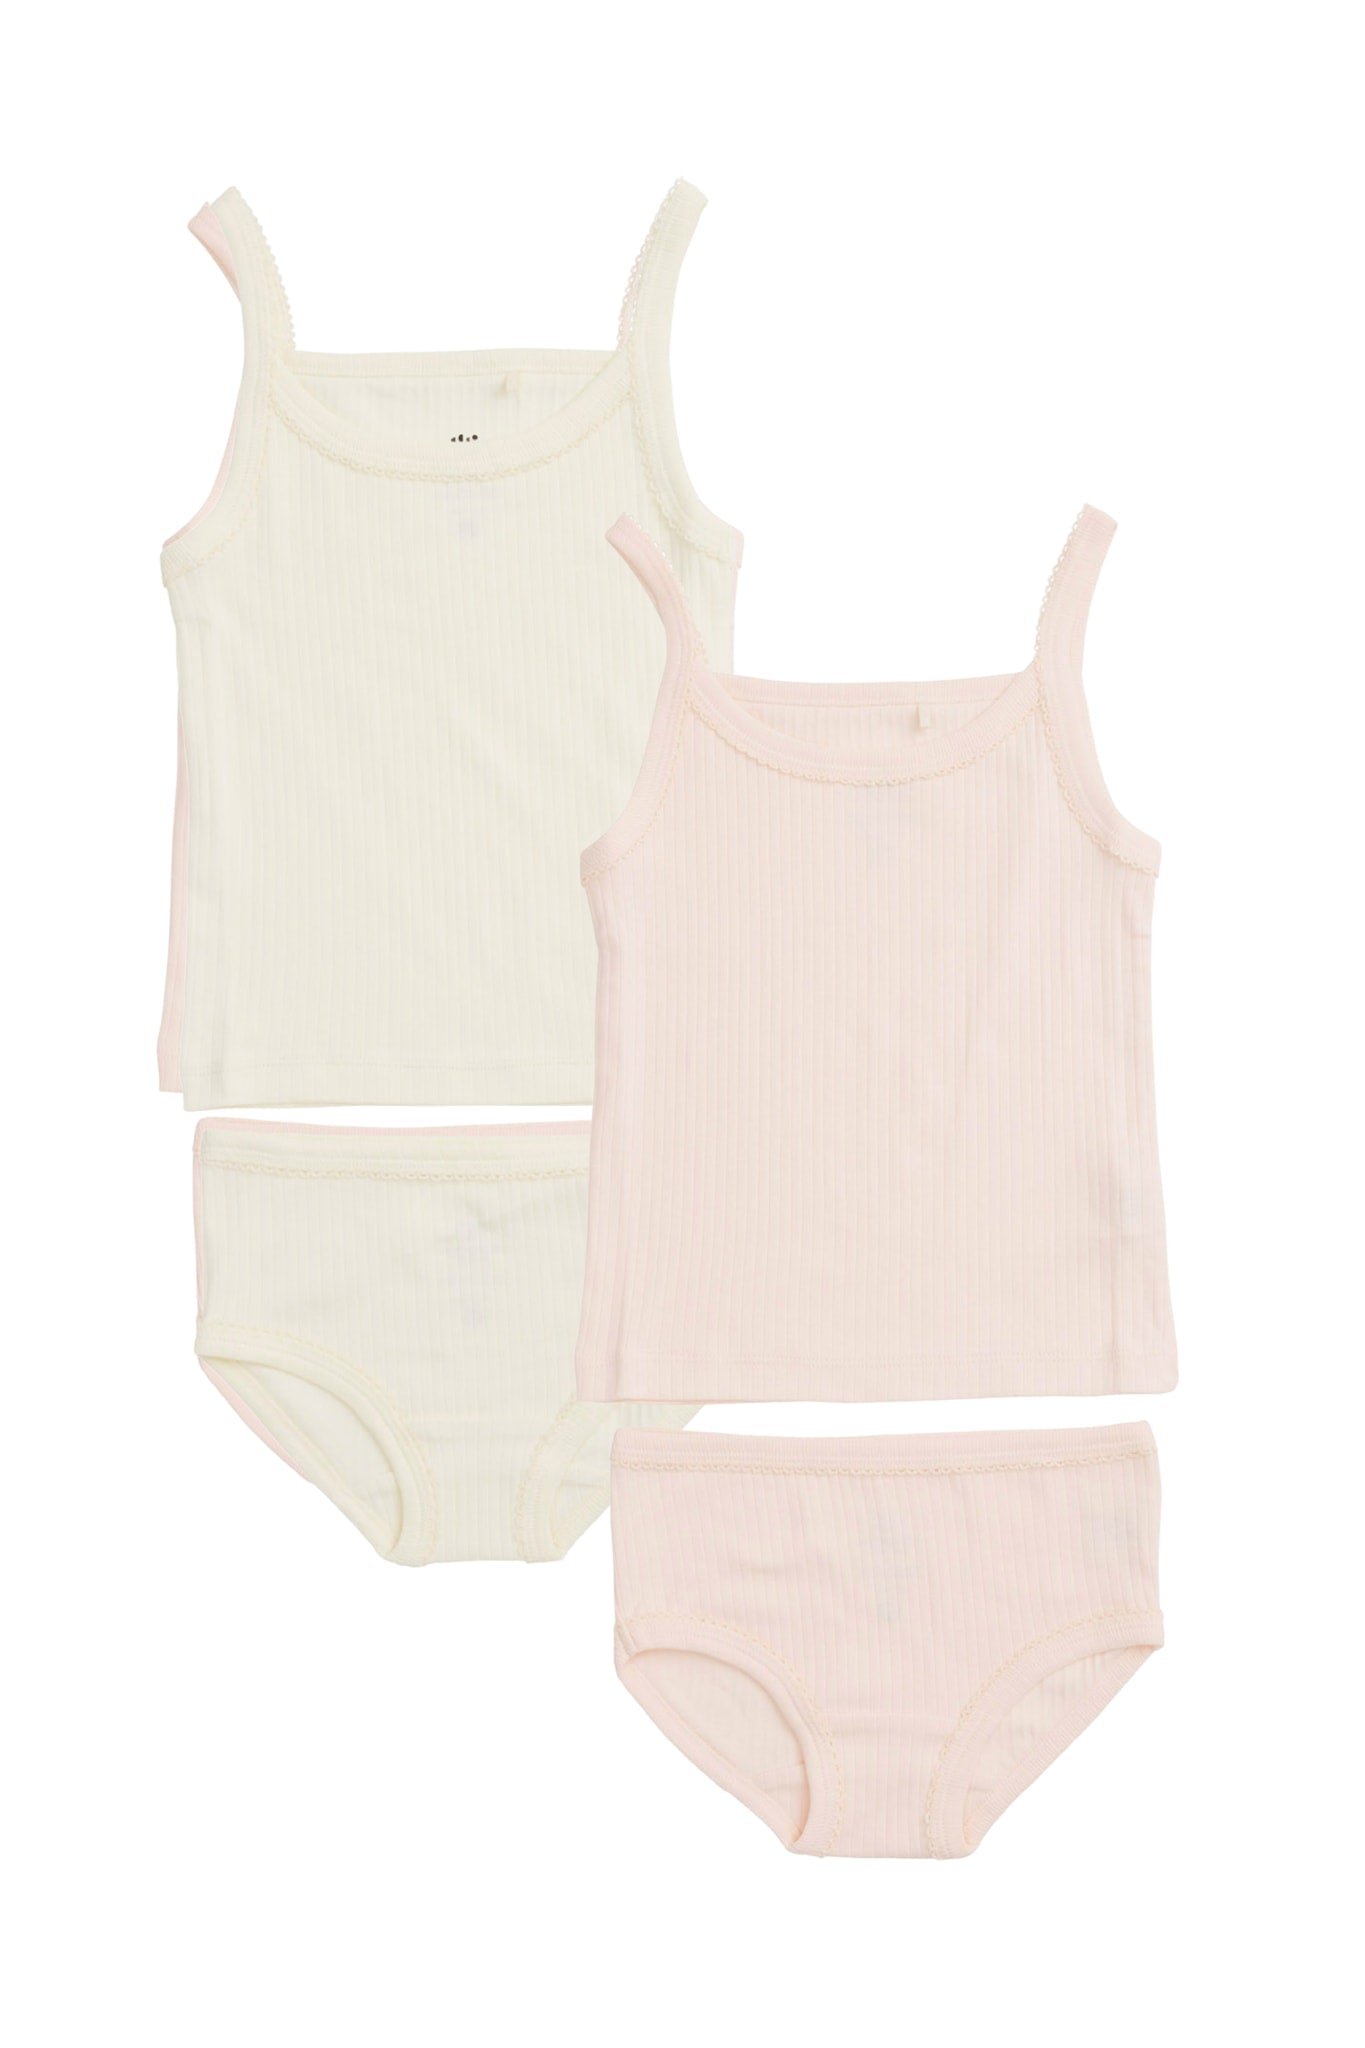 RIB JERSEY 2PACK STRAPTOP AND UNDERPANTS - SOFT PINK/ CREAM COMB. CORE